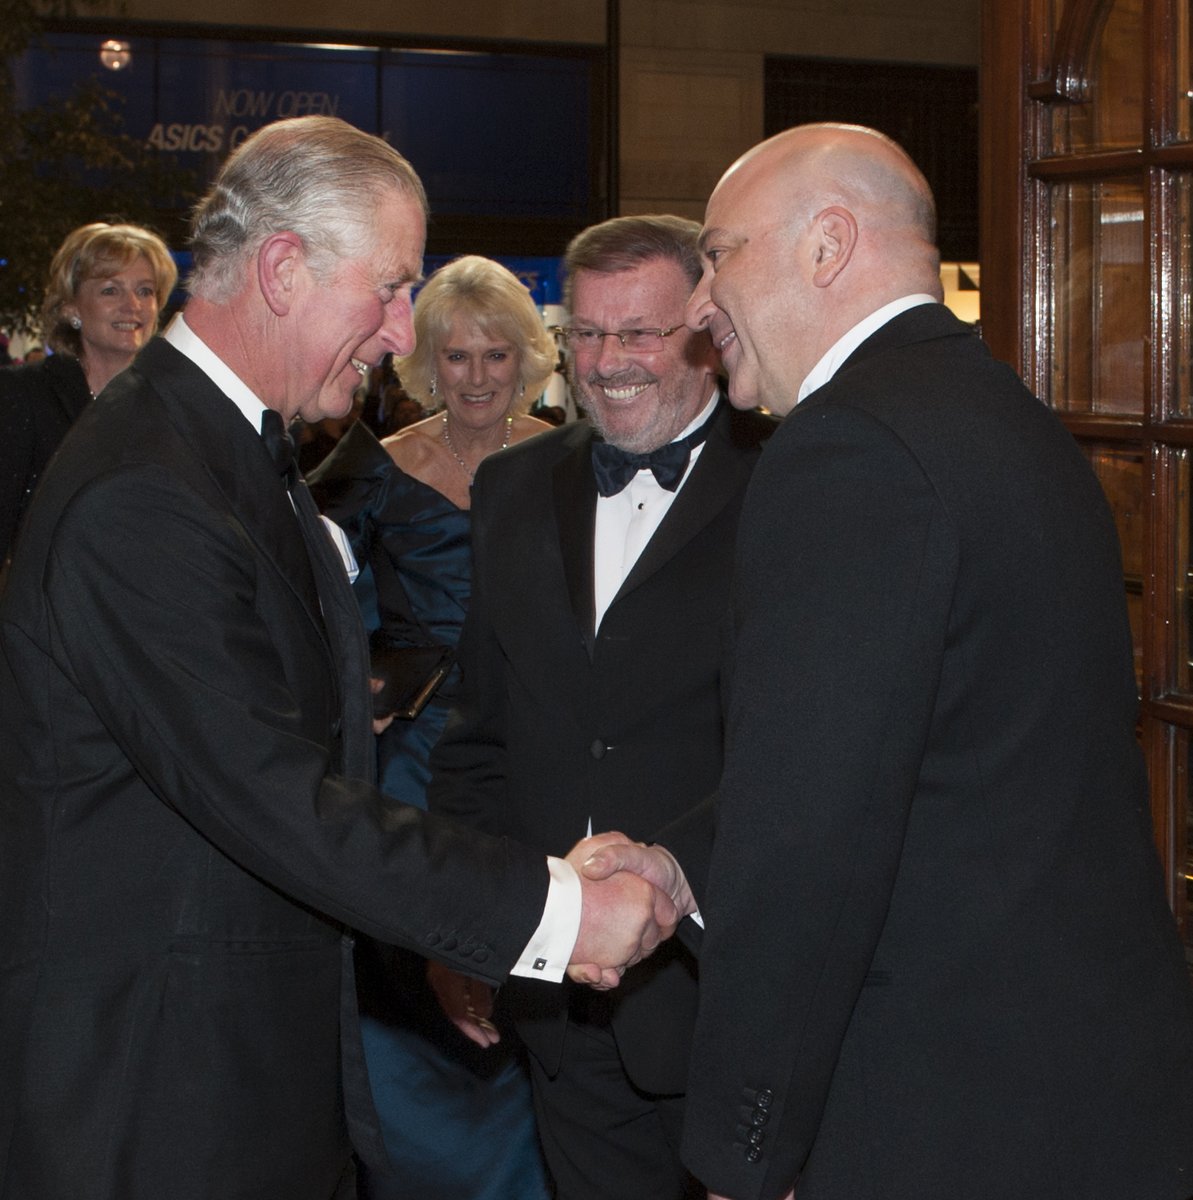 We are delighted to announce that HM The King @RoyalFamily is the new Patron of the @RoyalVariety Charity! His Majesty has long been a supporter of our important work and annual fundraiser, the #RoyalVarietyPerformance & we are thrilled at this recognition and continued support.